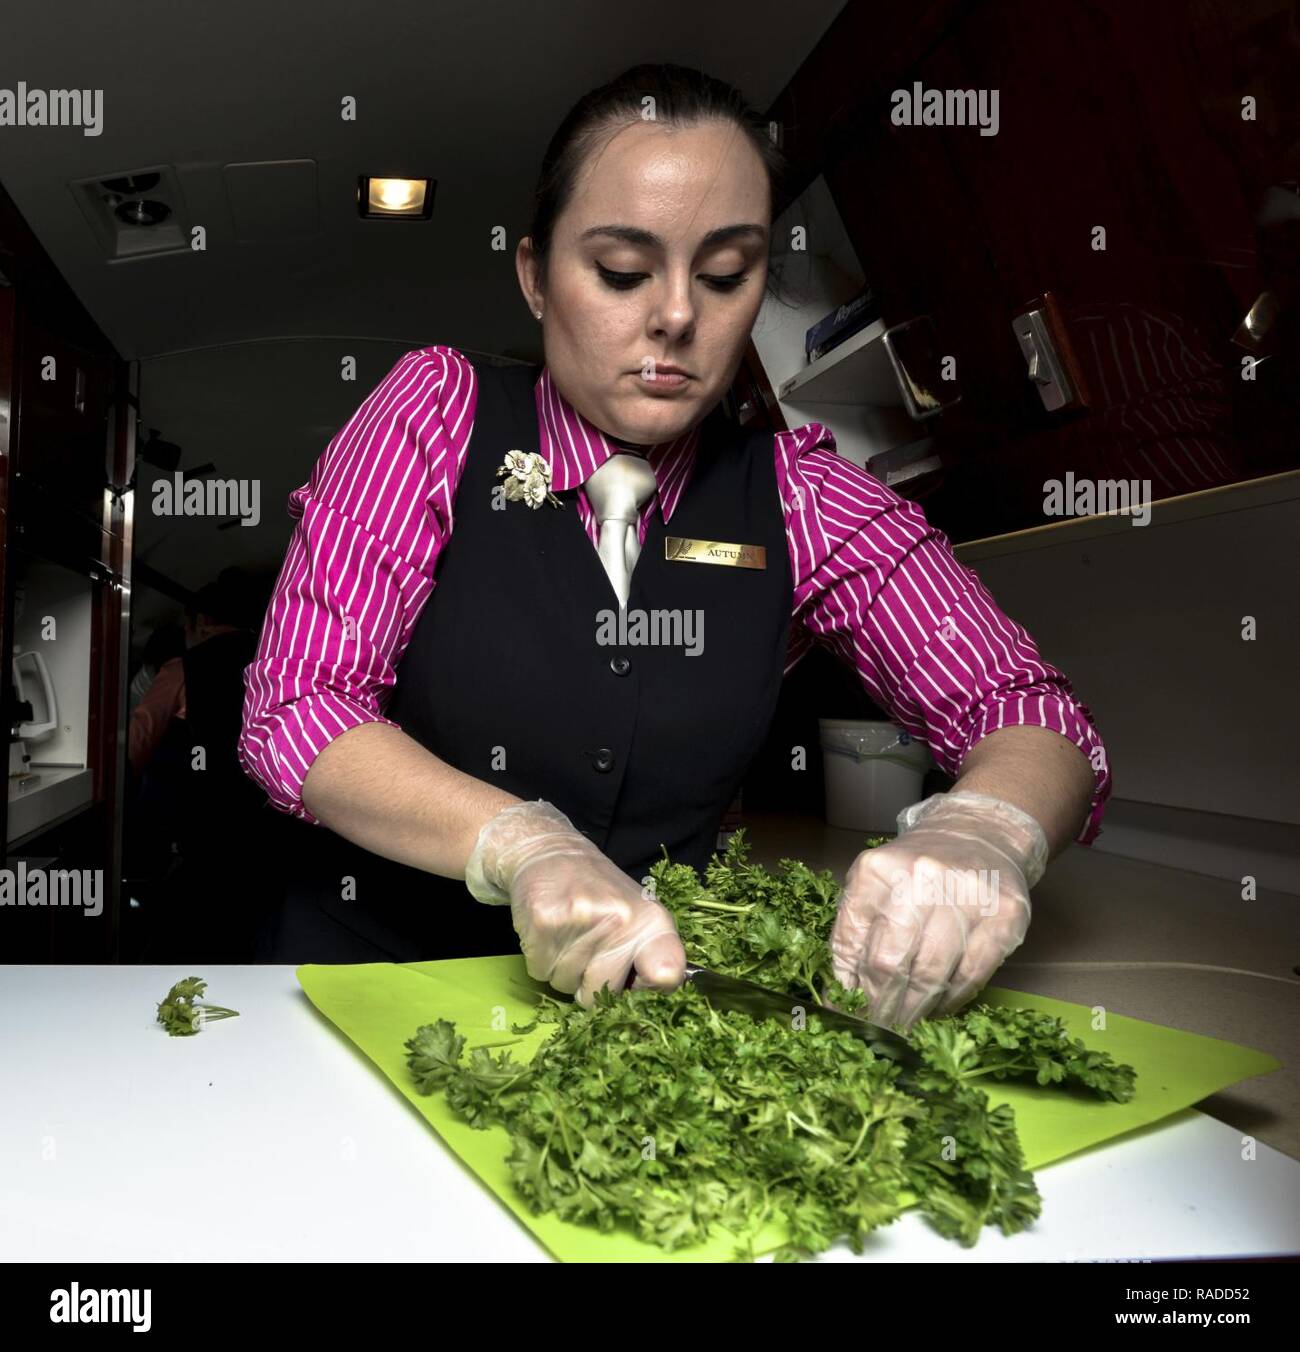 Staff Sgt. Autumn Murphy, 99th Airlift Squadron flight attendant, chops vegetables in a tiny kitchen in the rear of a C-20B, as the aircraft cruises at about 40,000 feet while flying between Tallahassee, Florida, and Panama City, Panama, Jan. 27, 2017. FAs are often praised for their culinary artistry and the uniqueness of preparing full meals while crossing the nation or oceans; however, foremost they are safety experts, and are responsible for the safe and confortable airlift of America’s most senior leaders anywhere on the globe. Stock Photo